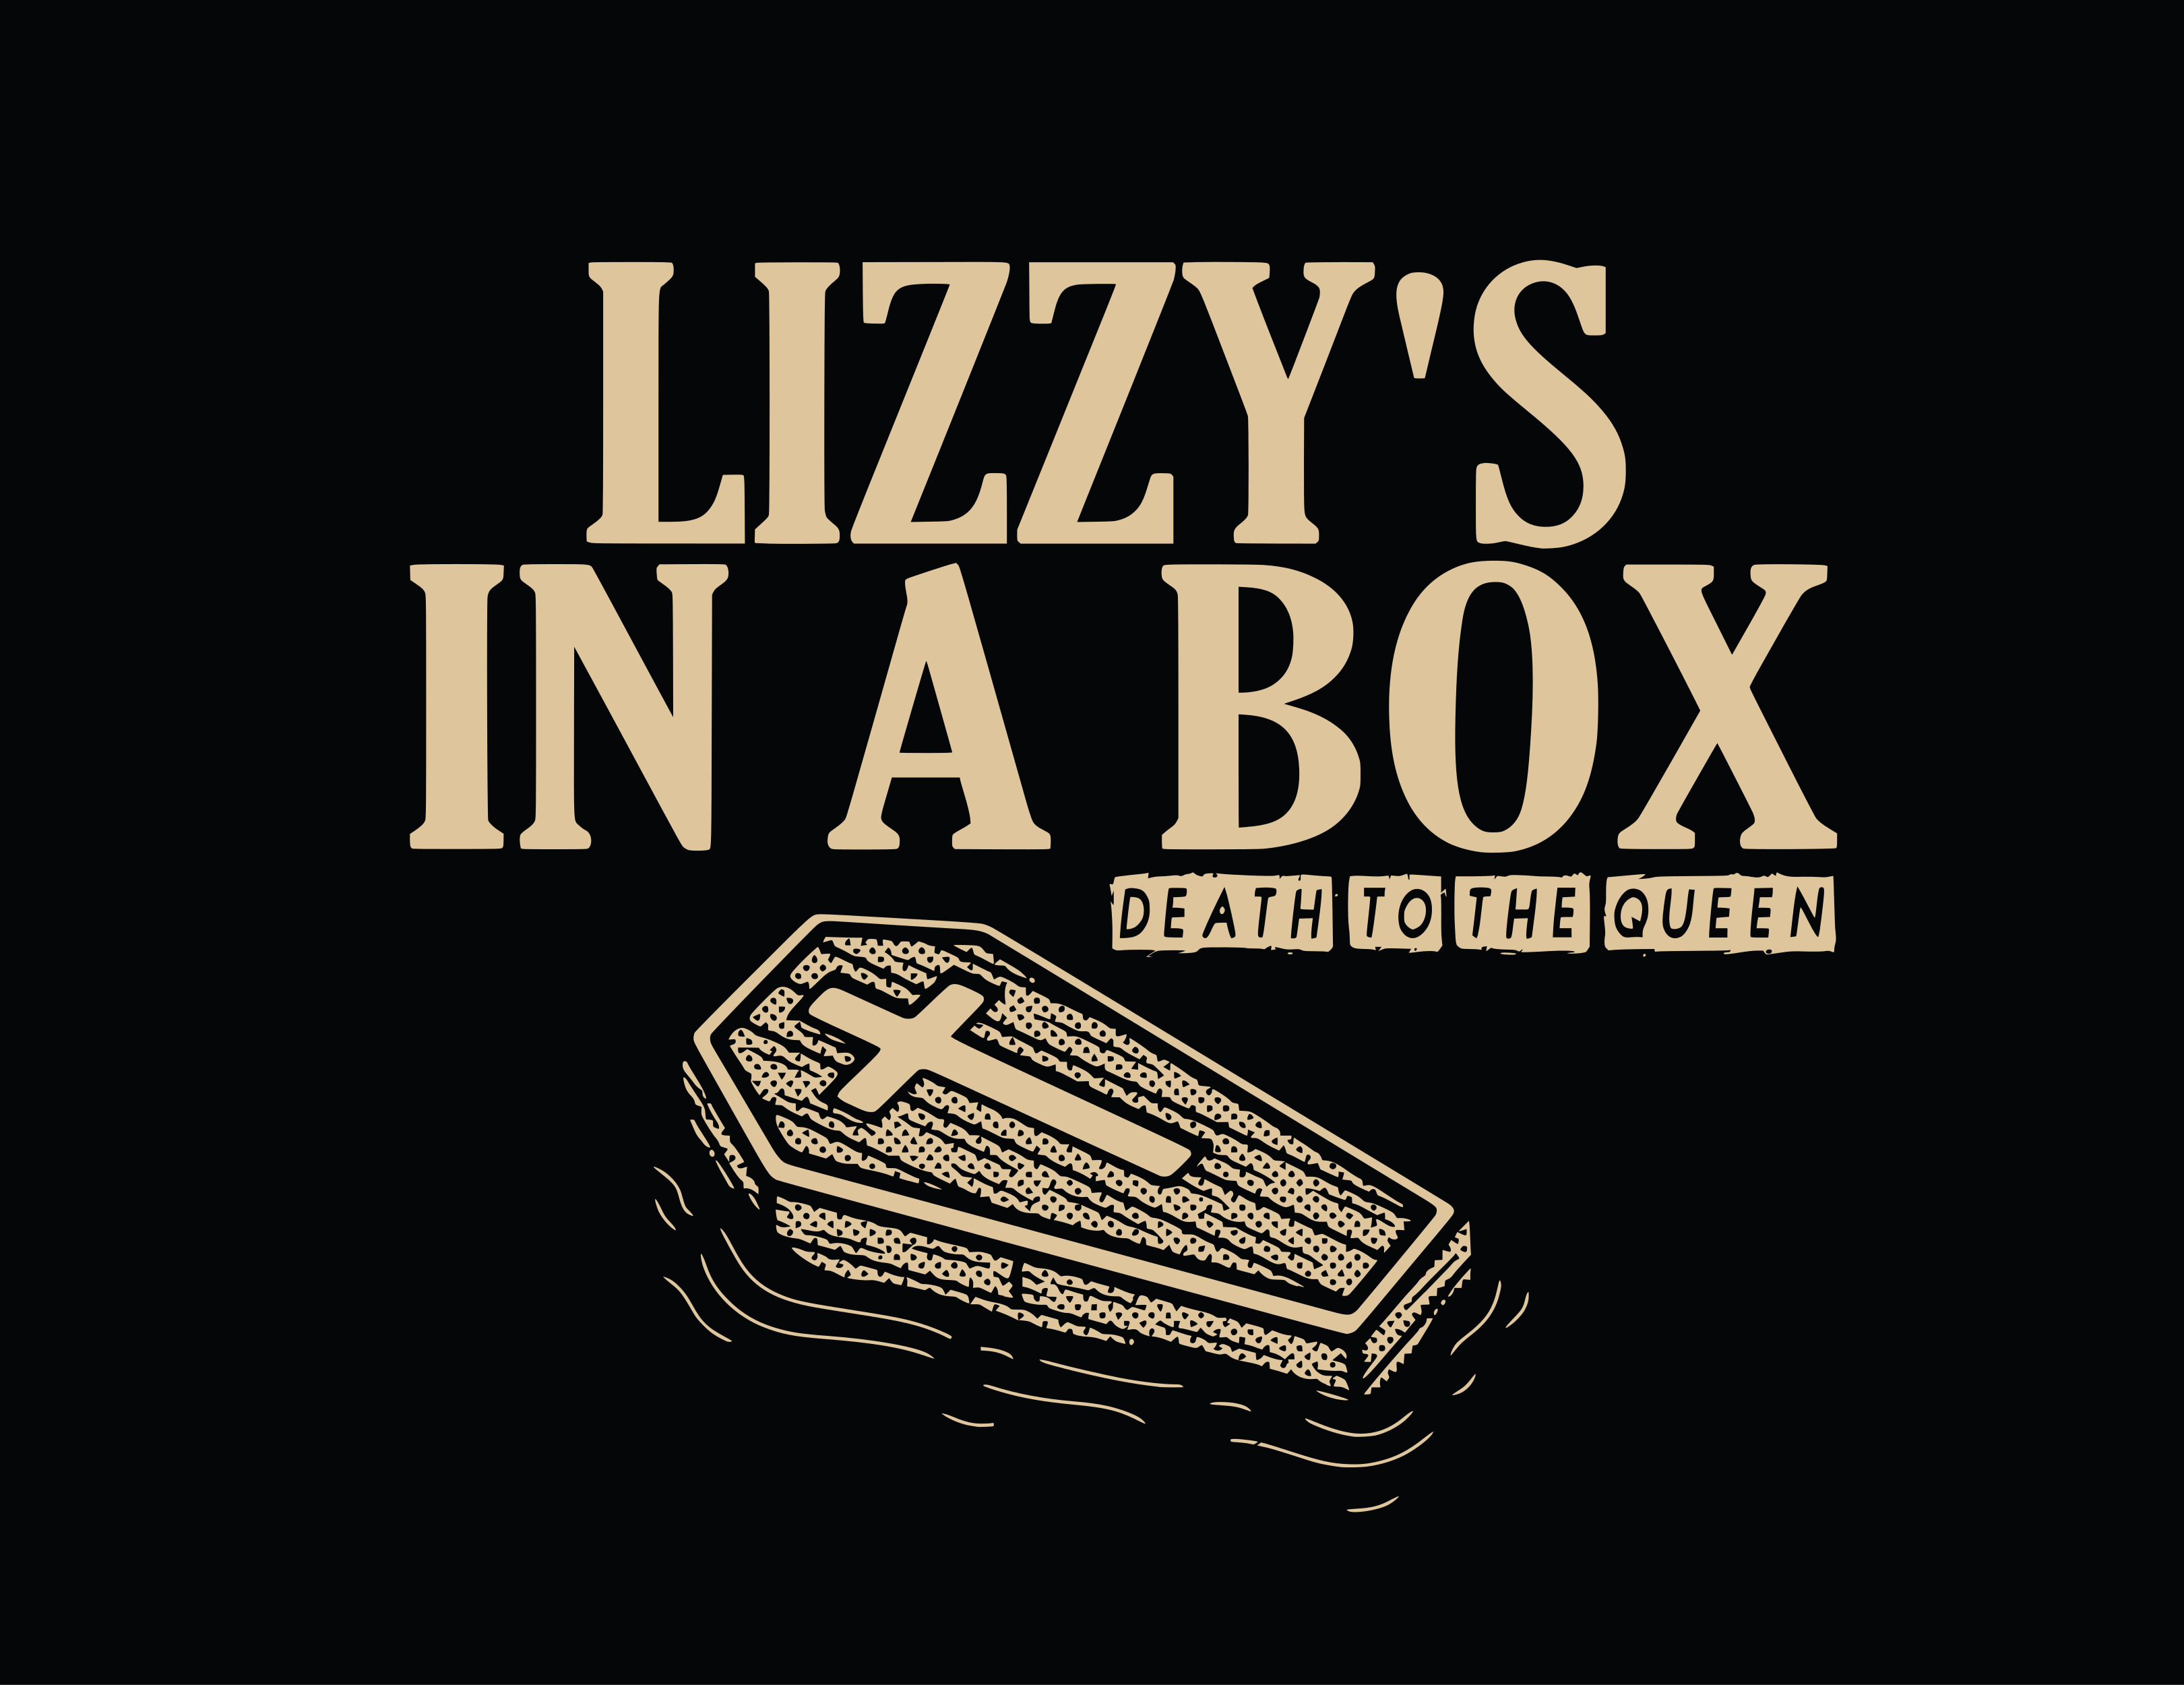 Lizzy's in a box, death to the queen